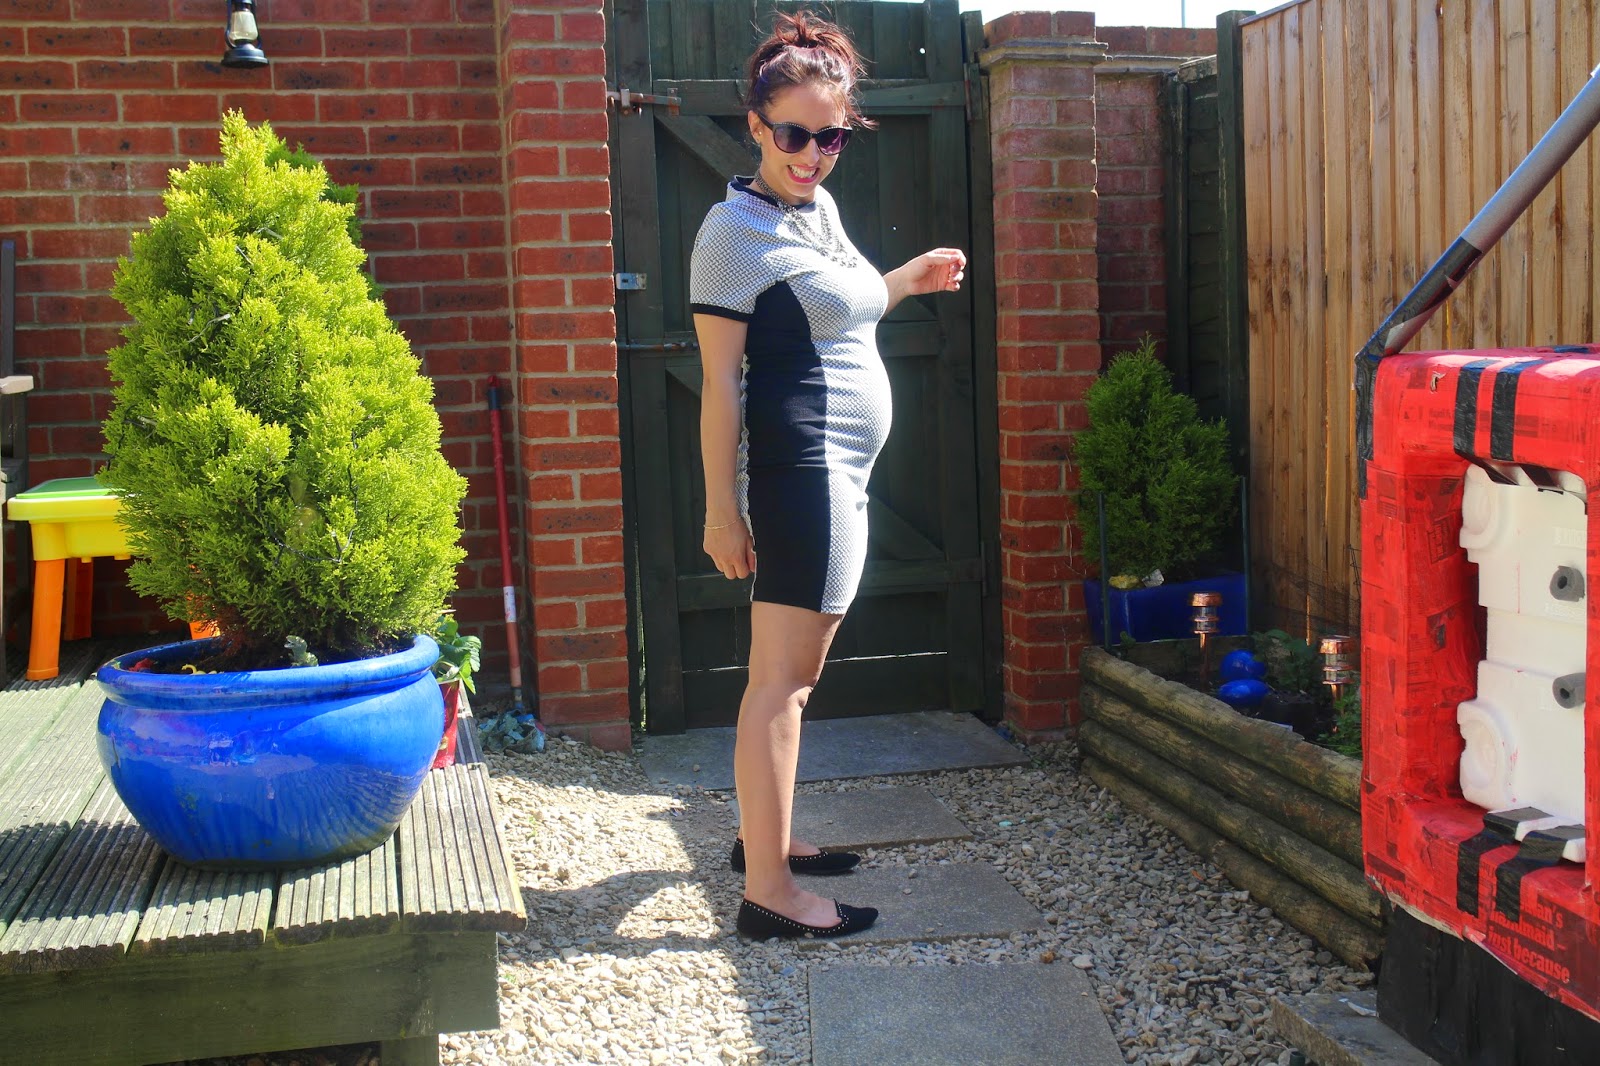 Fashion, Fashion inspiration, OOTD, Topshop, Maternity, Maternity style, how to dress when pregnant, what to wear when pregnant, office maternity wear, topshop maternity wear